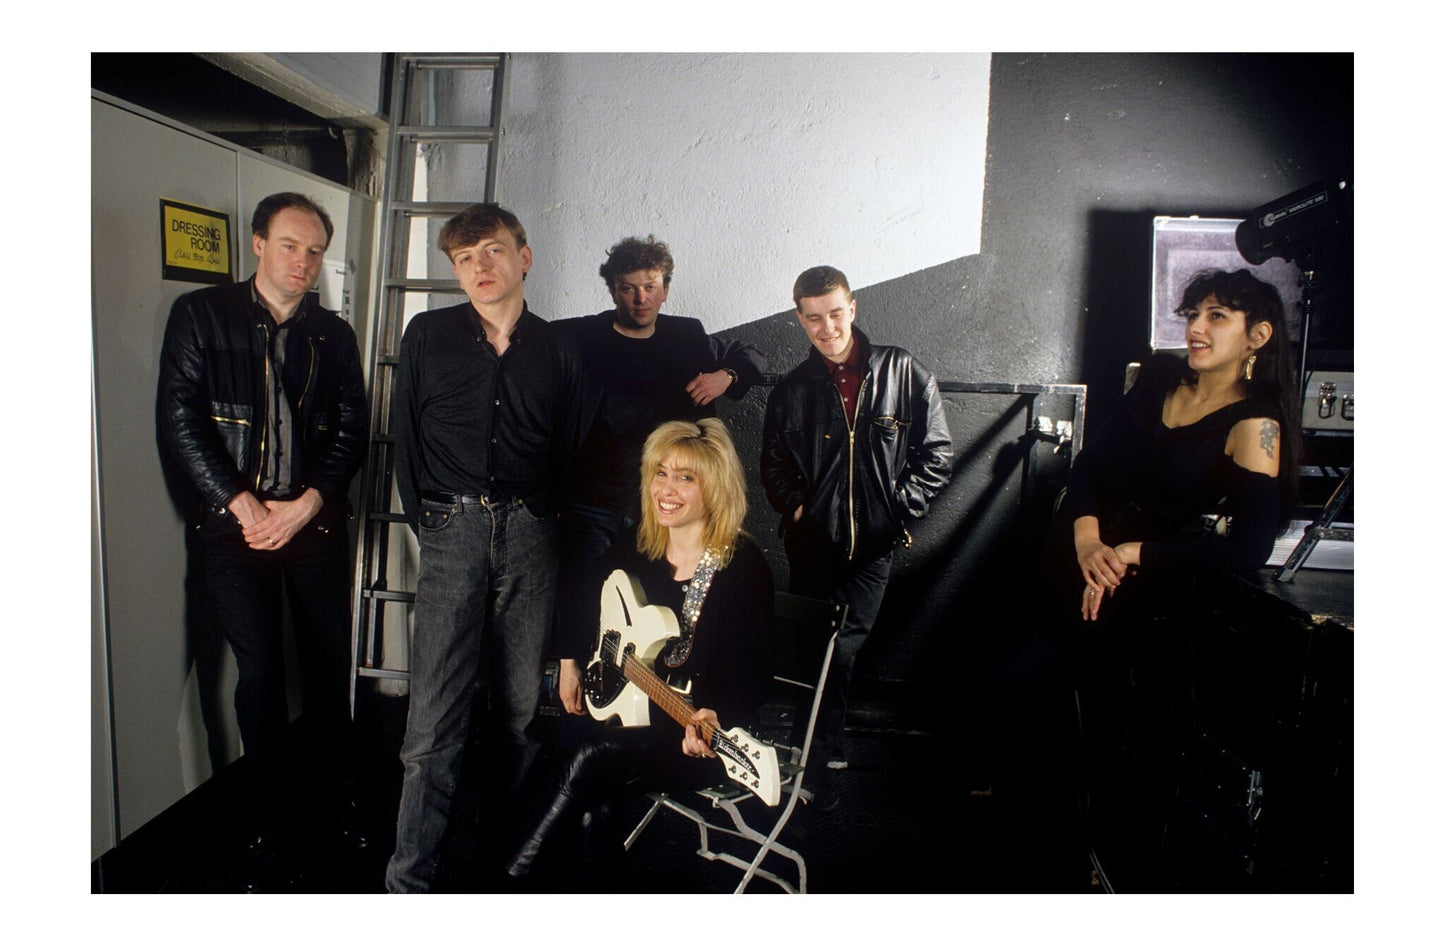 The Fall - Full Band Portrait Backstage, Germany, 1988 Print